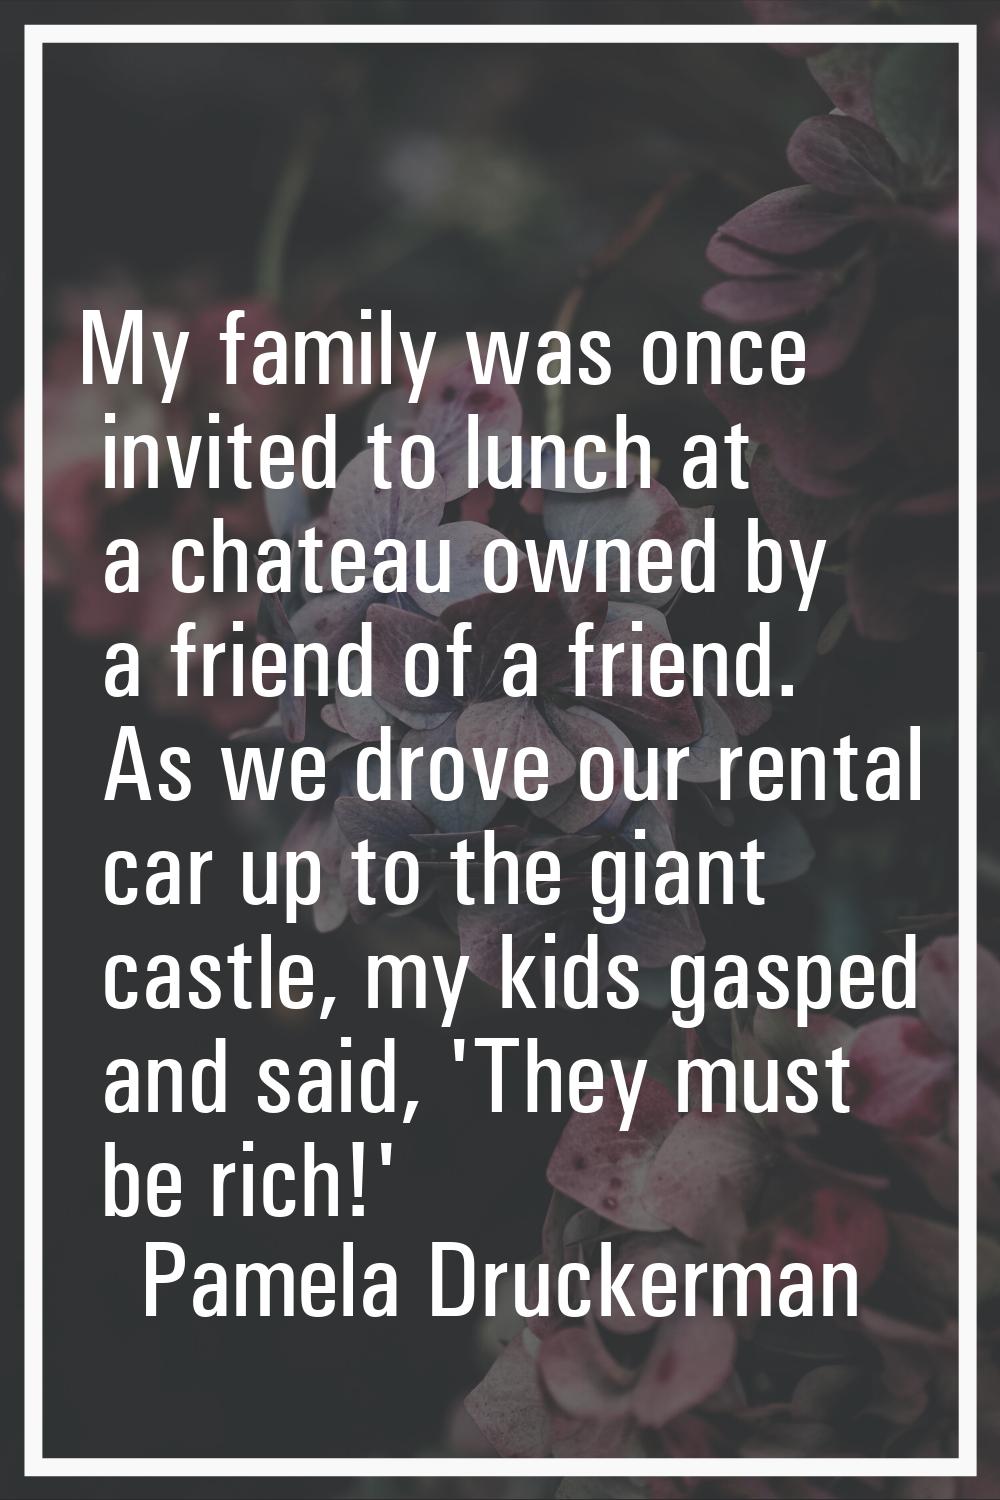 My family was once invited to lunch at a chateau owned by a friend of a friend. As we drove our ren